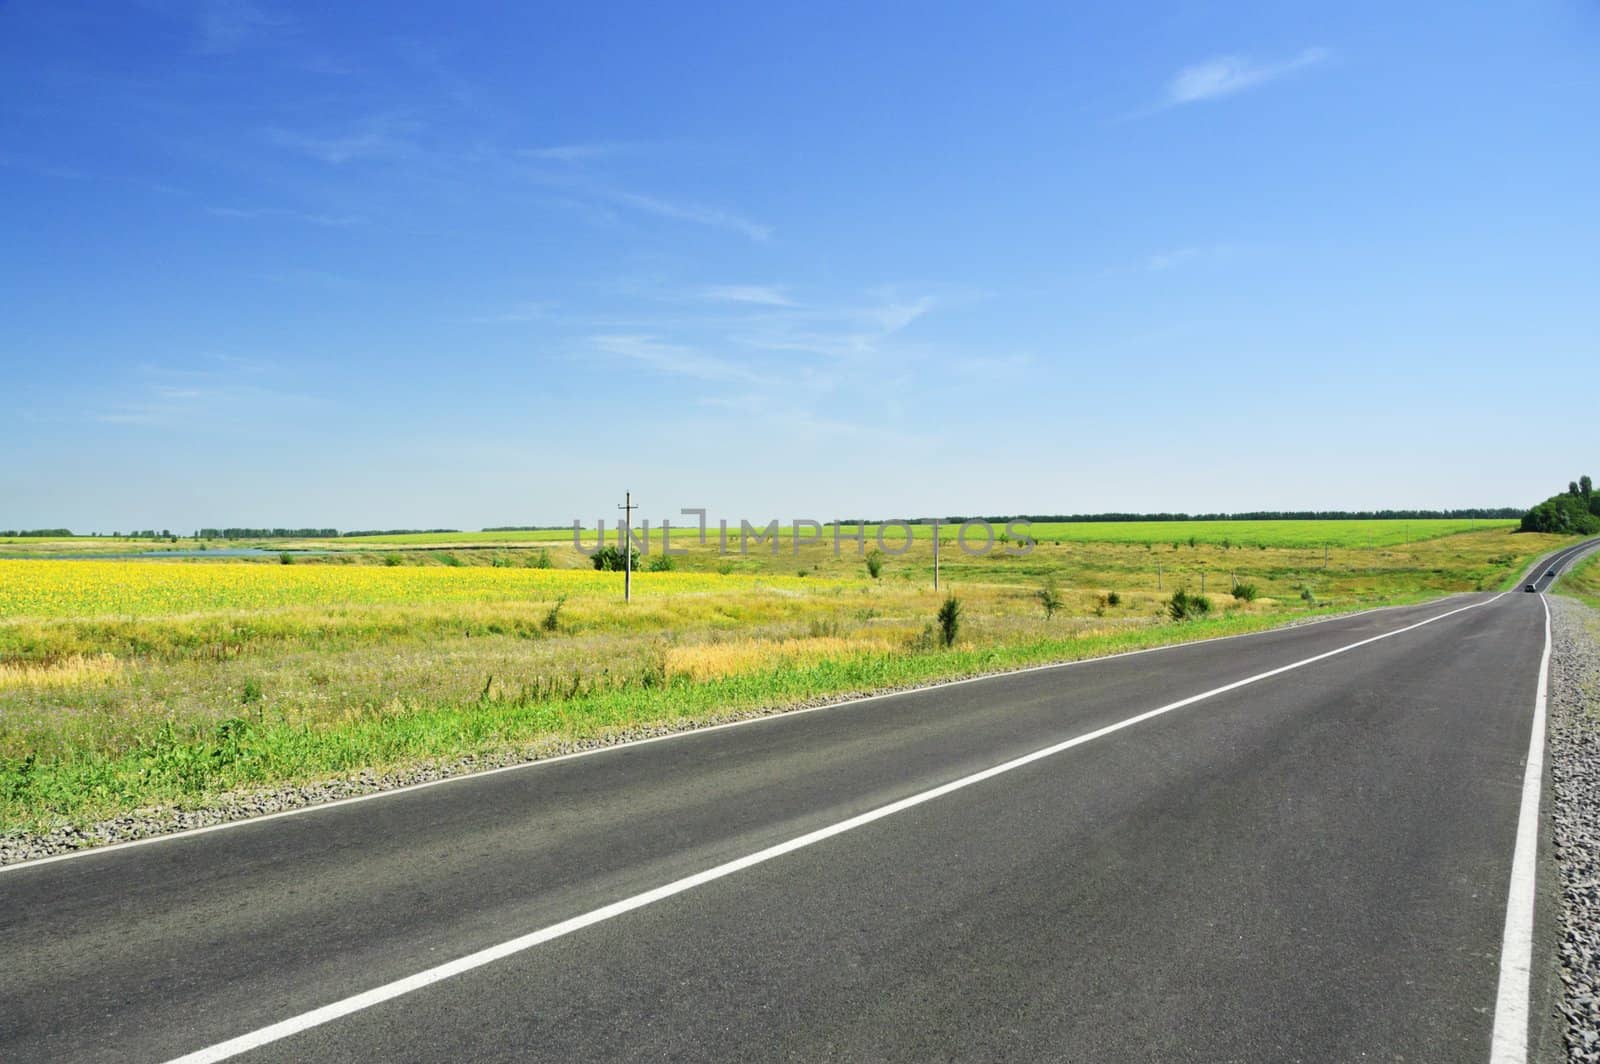 Road and green field on a background of blue sky.